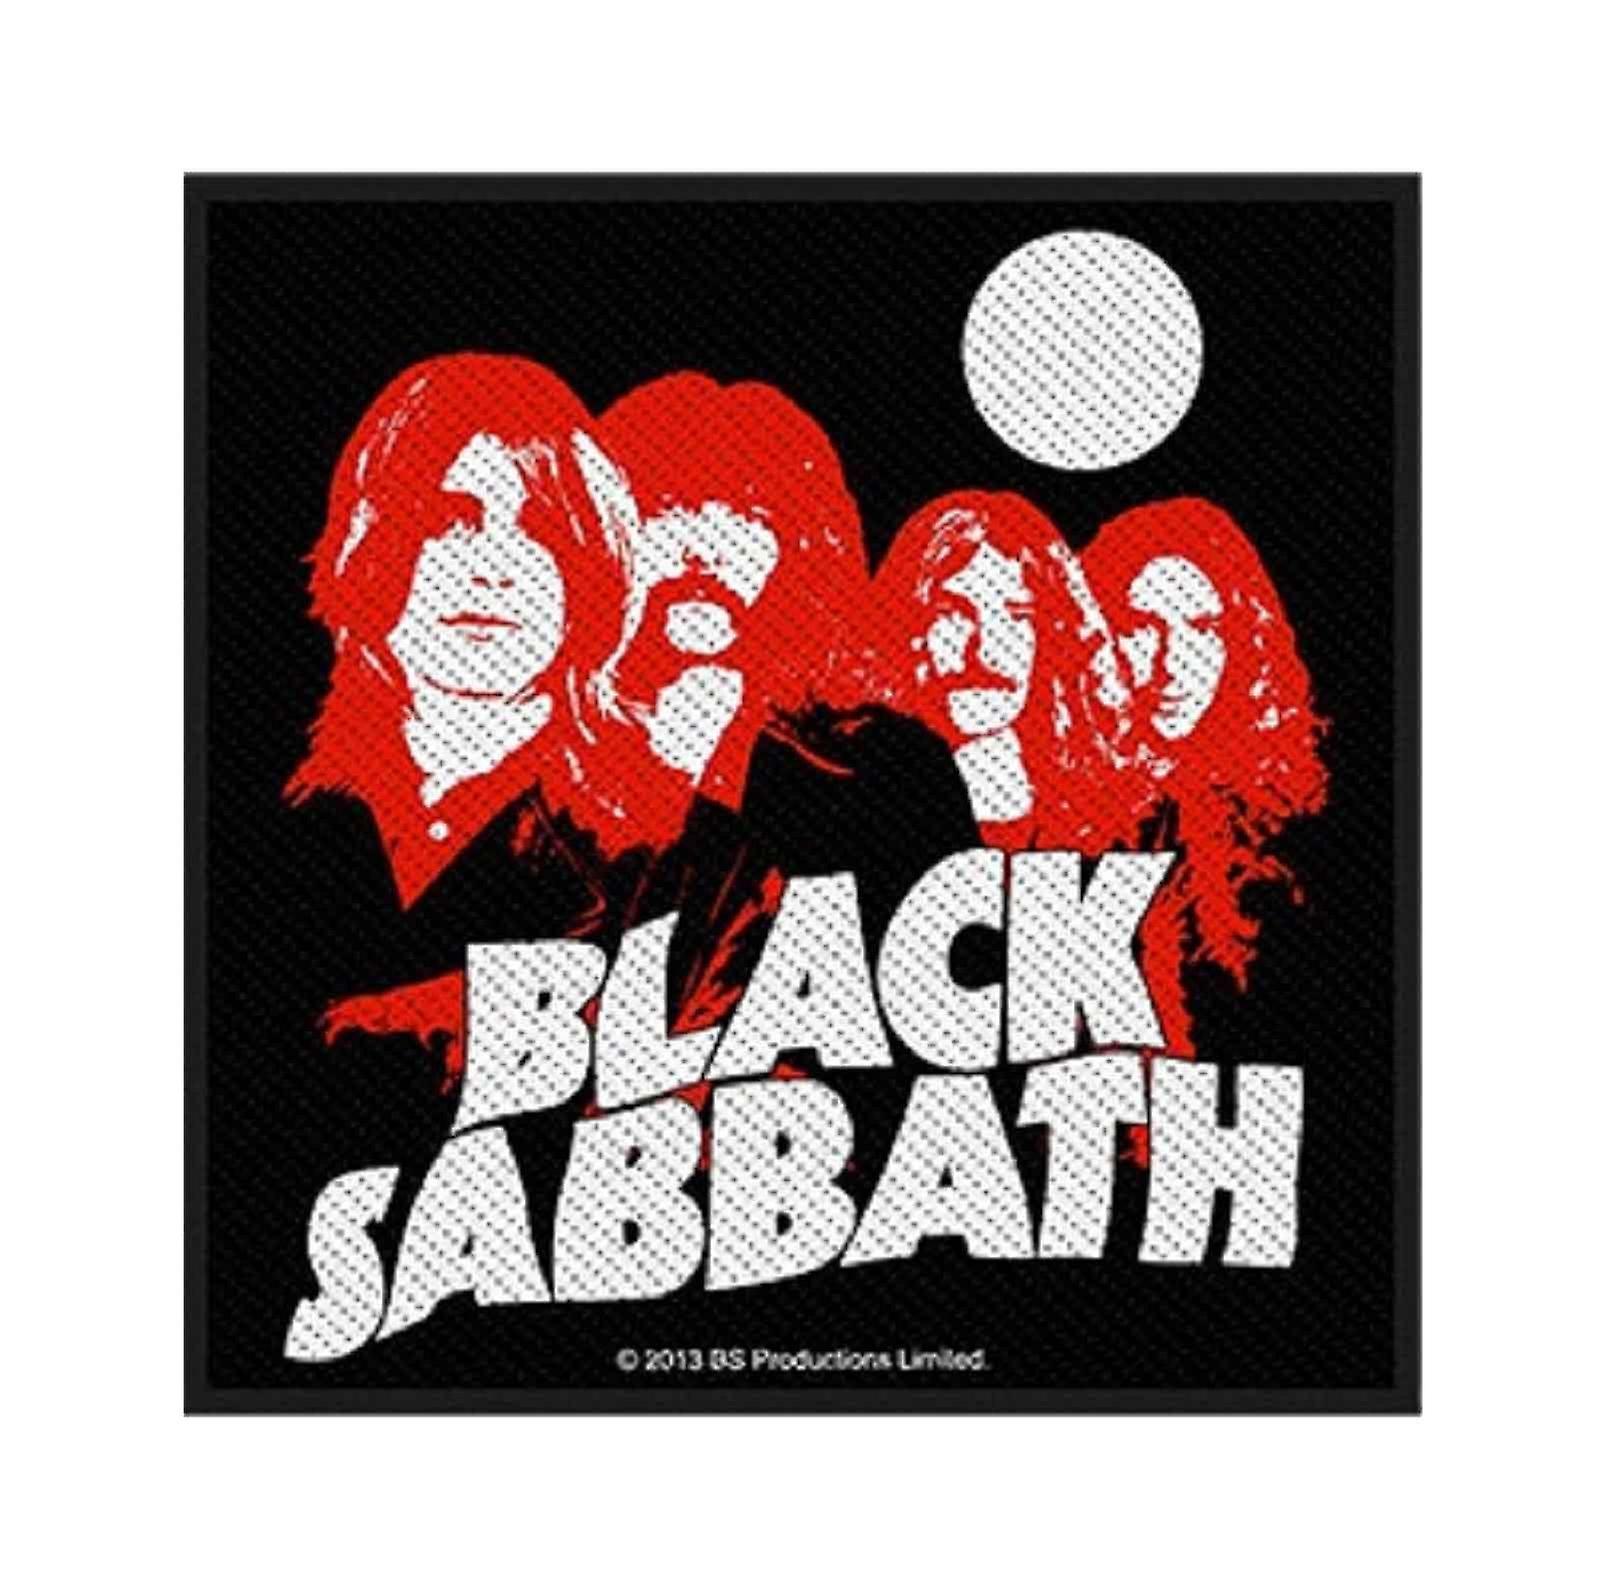 Black and Red Band Logo - Black Sabbath Patch band logo Red Portraits Official woven (10cm x ...